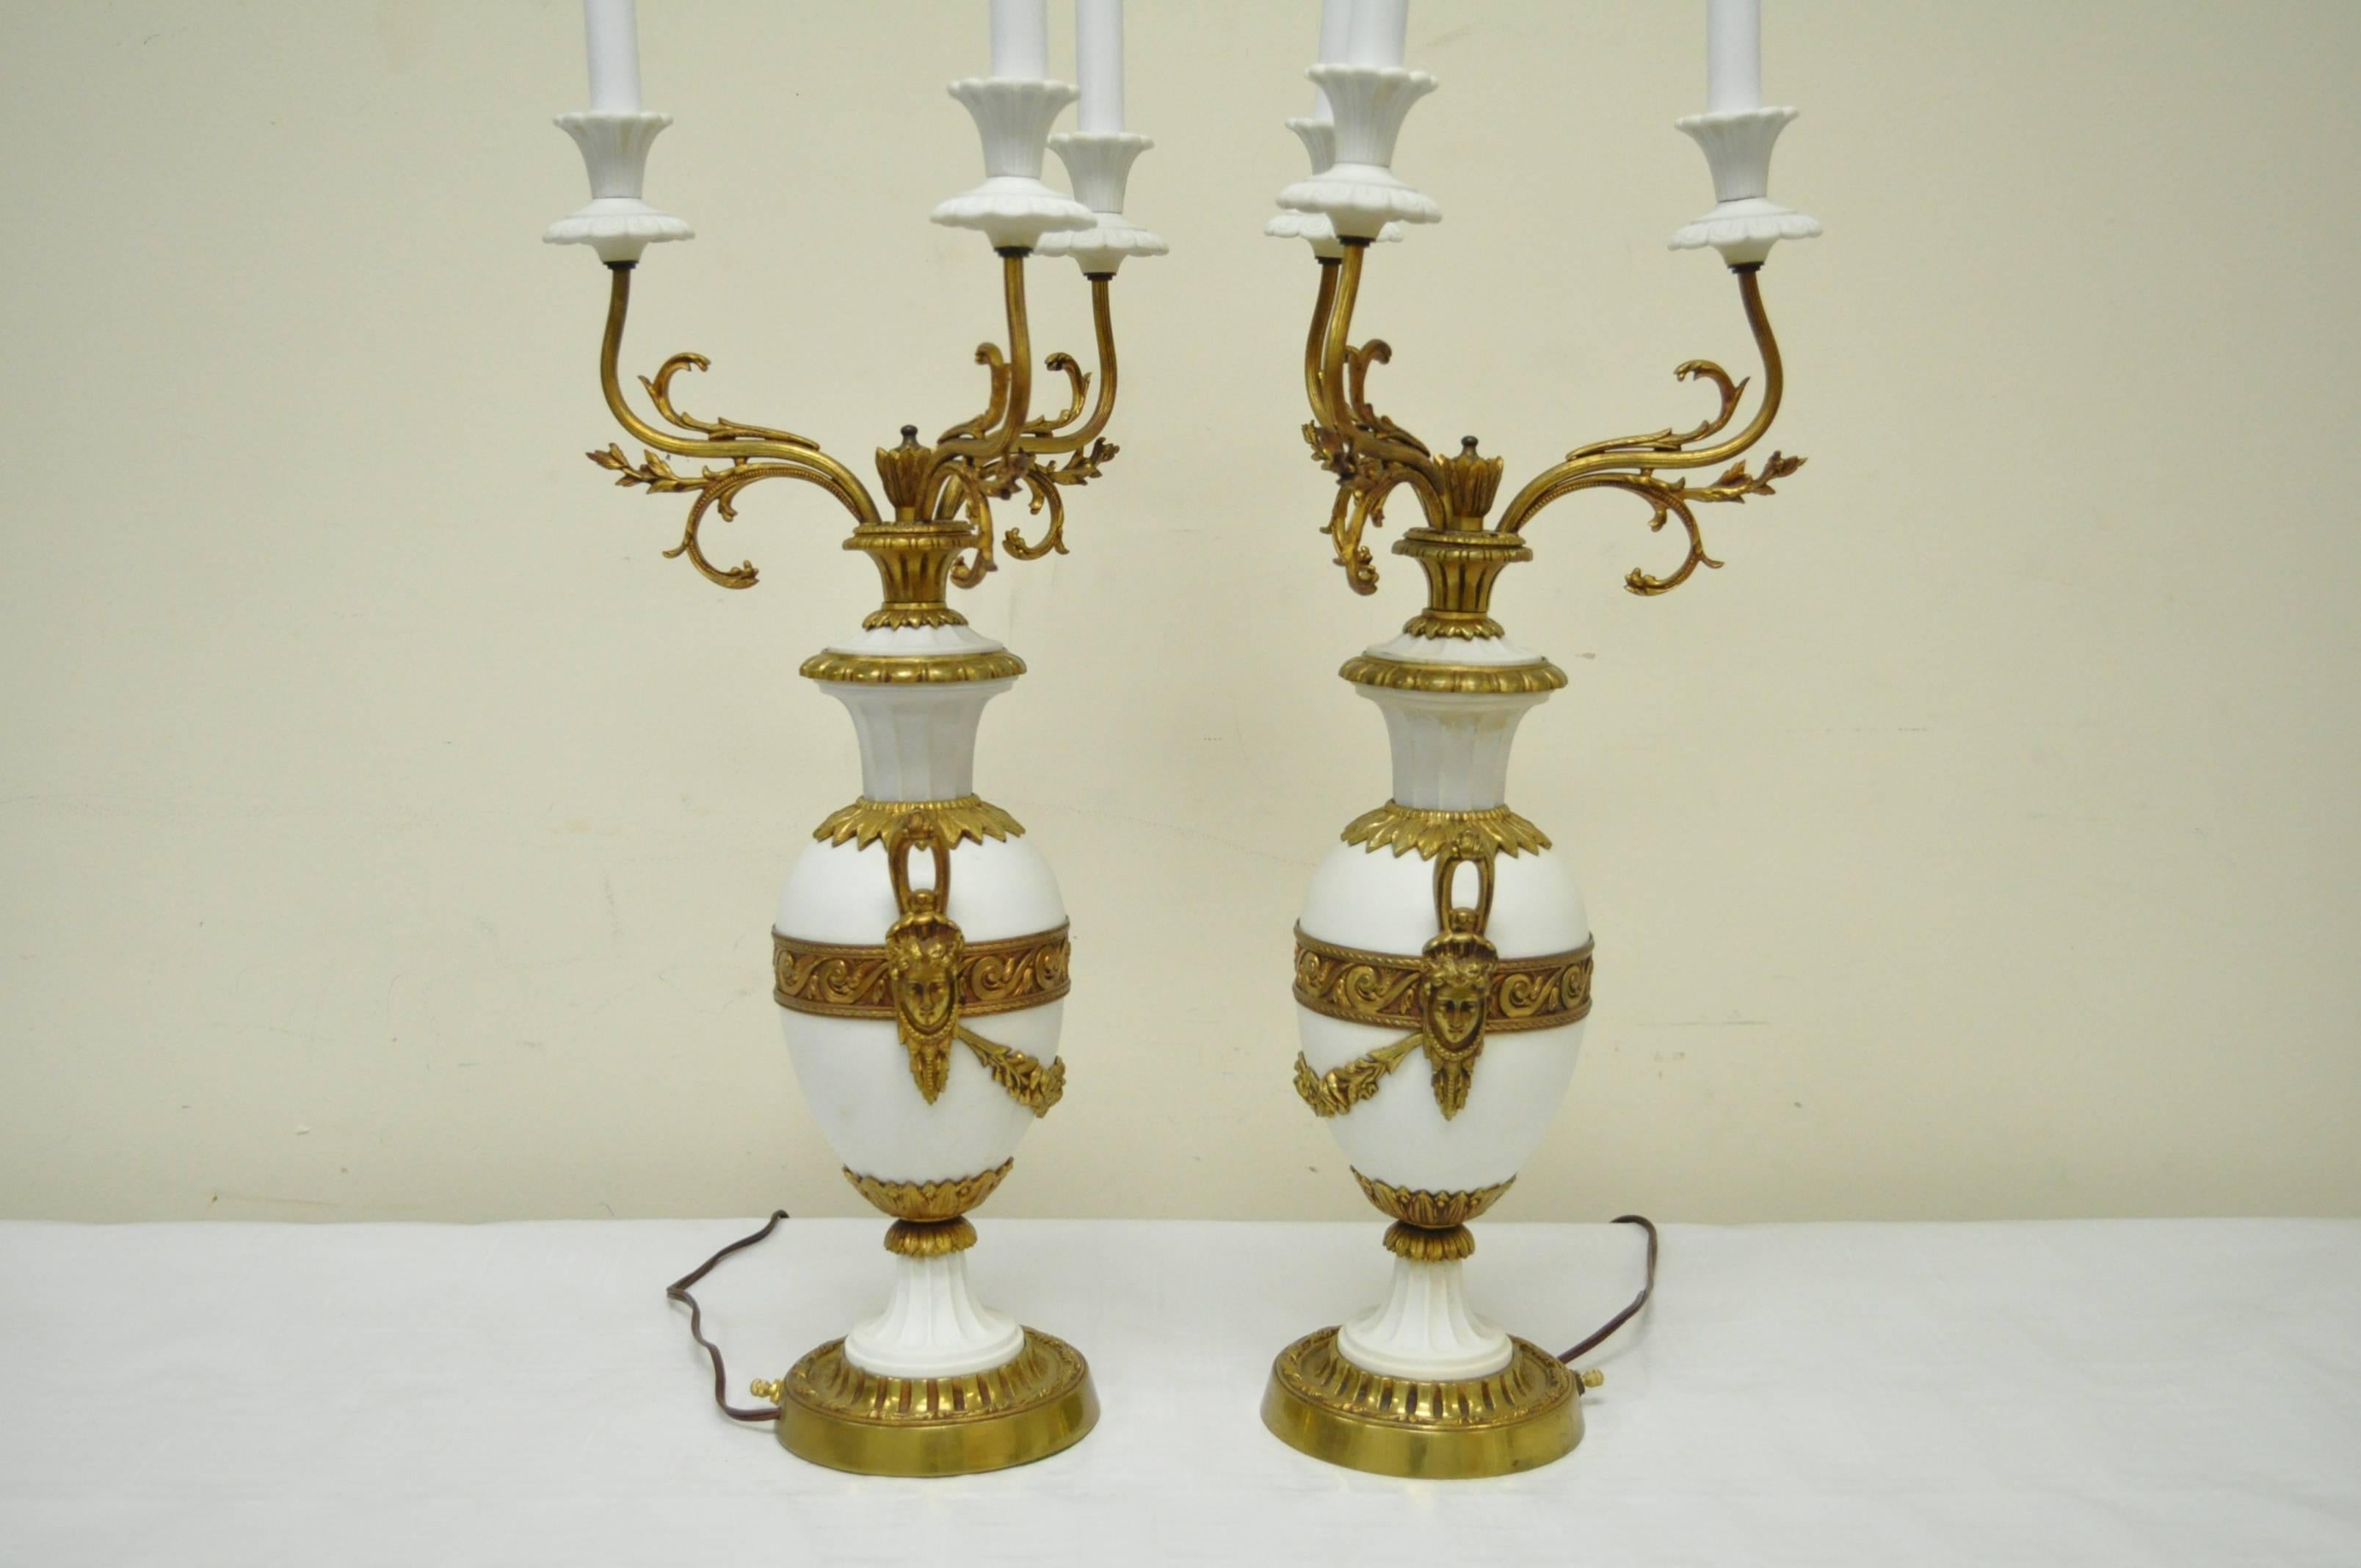 Pair of French Louis XV / XVI Style Bronze and Porcelain Candelabra Table Lamps For Sale 1